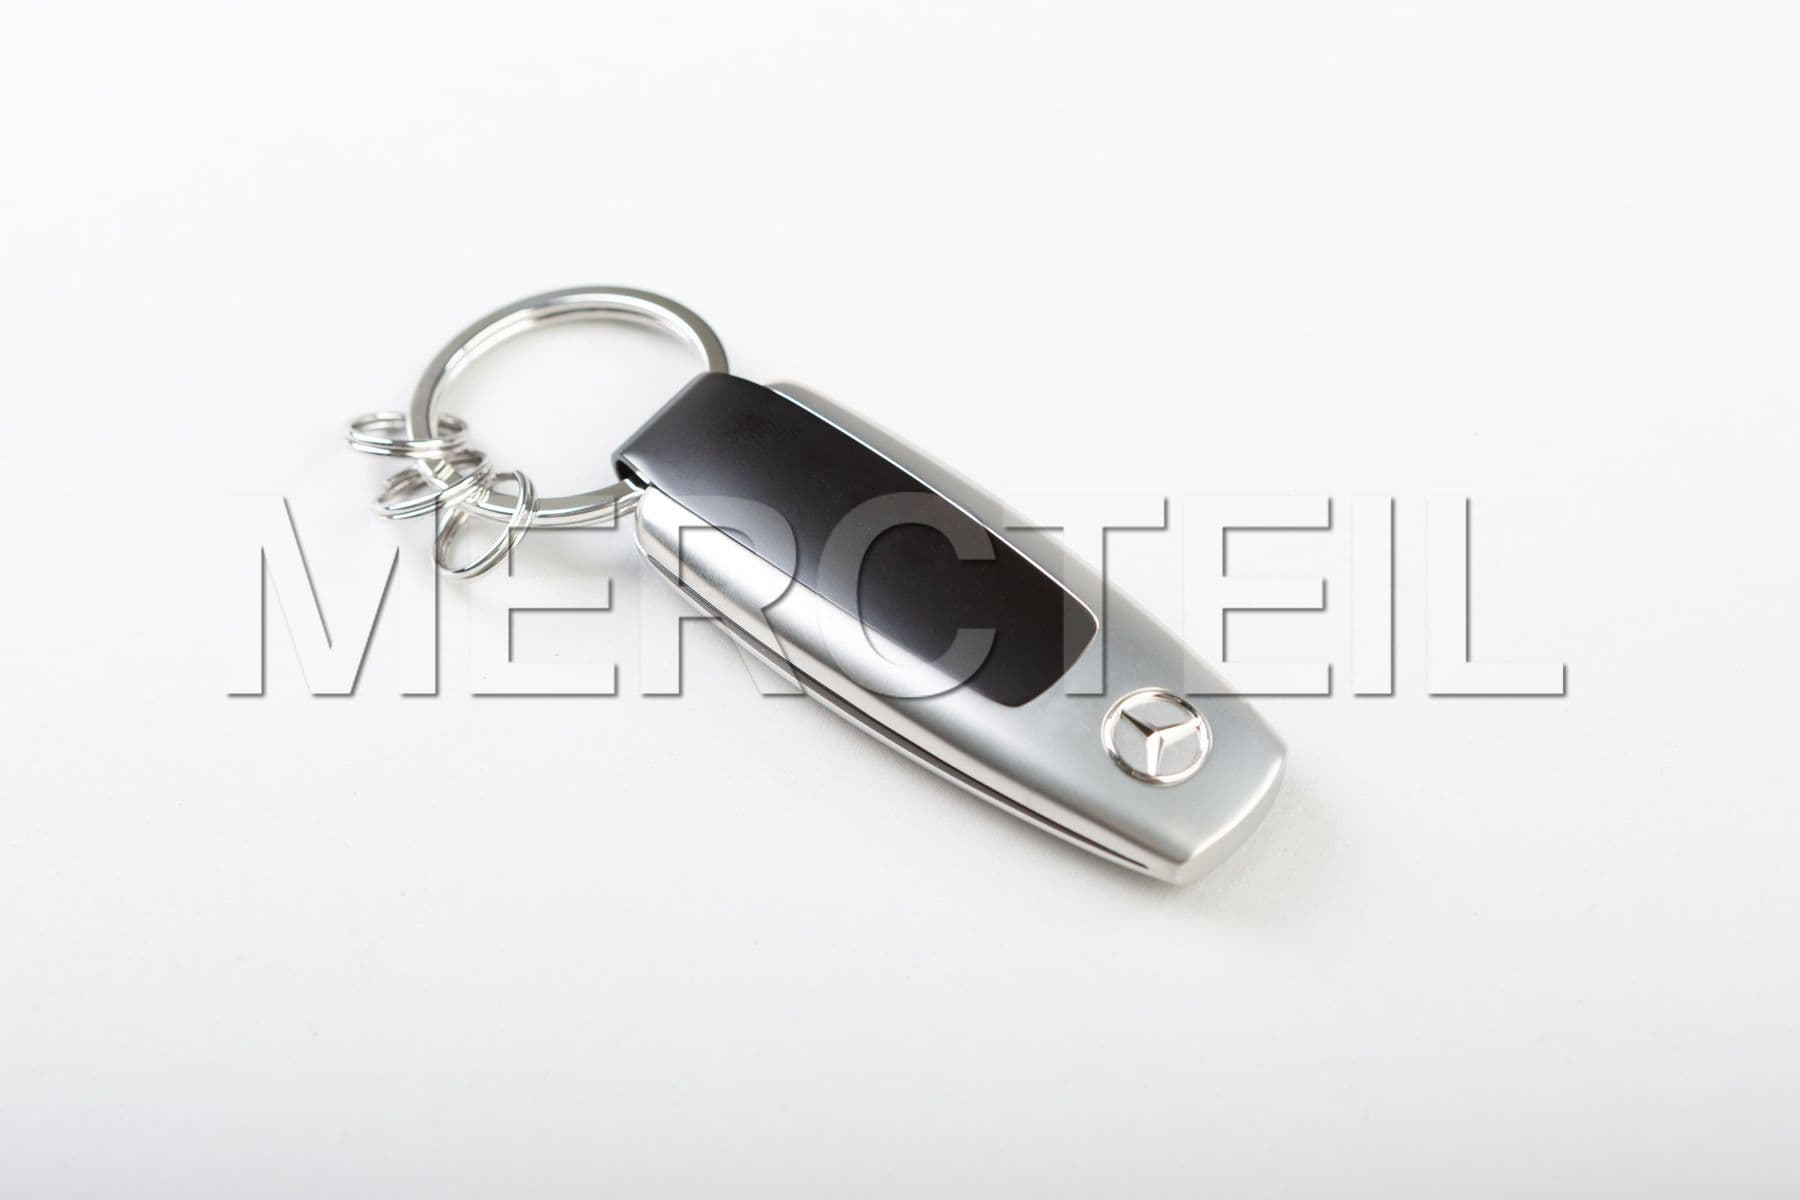 Buy the spare part Mercedes-Benz B66958426 key rings